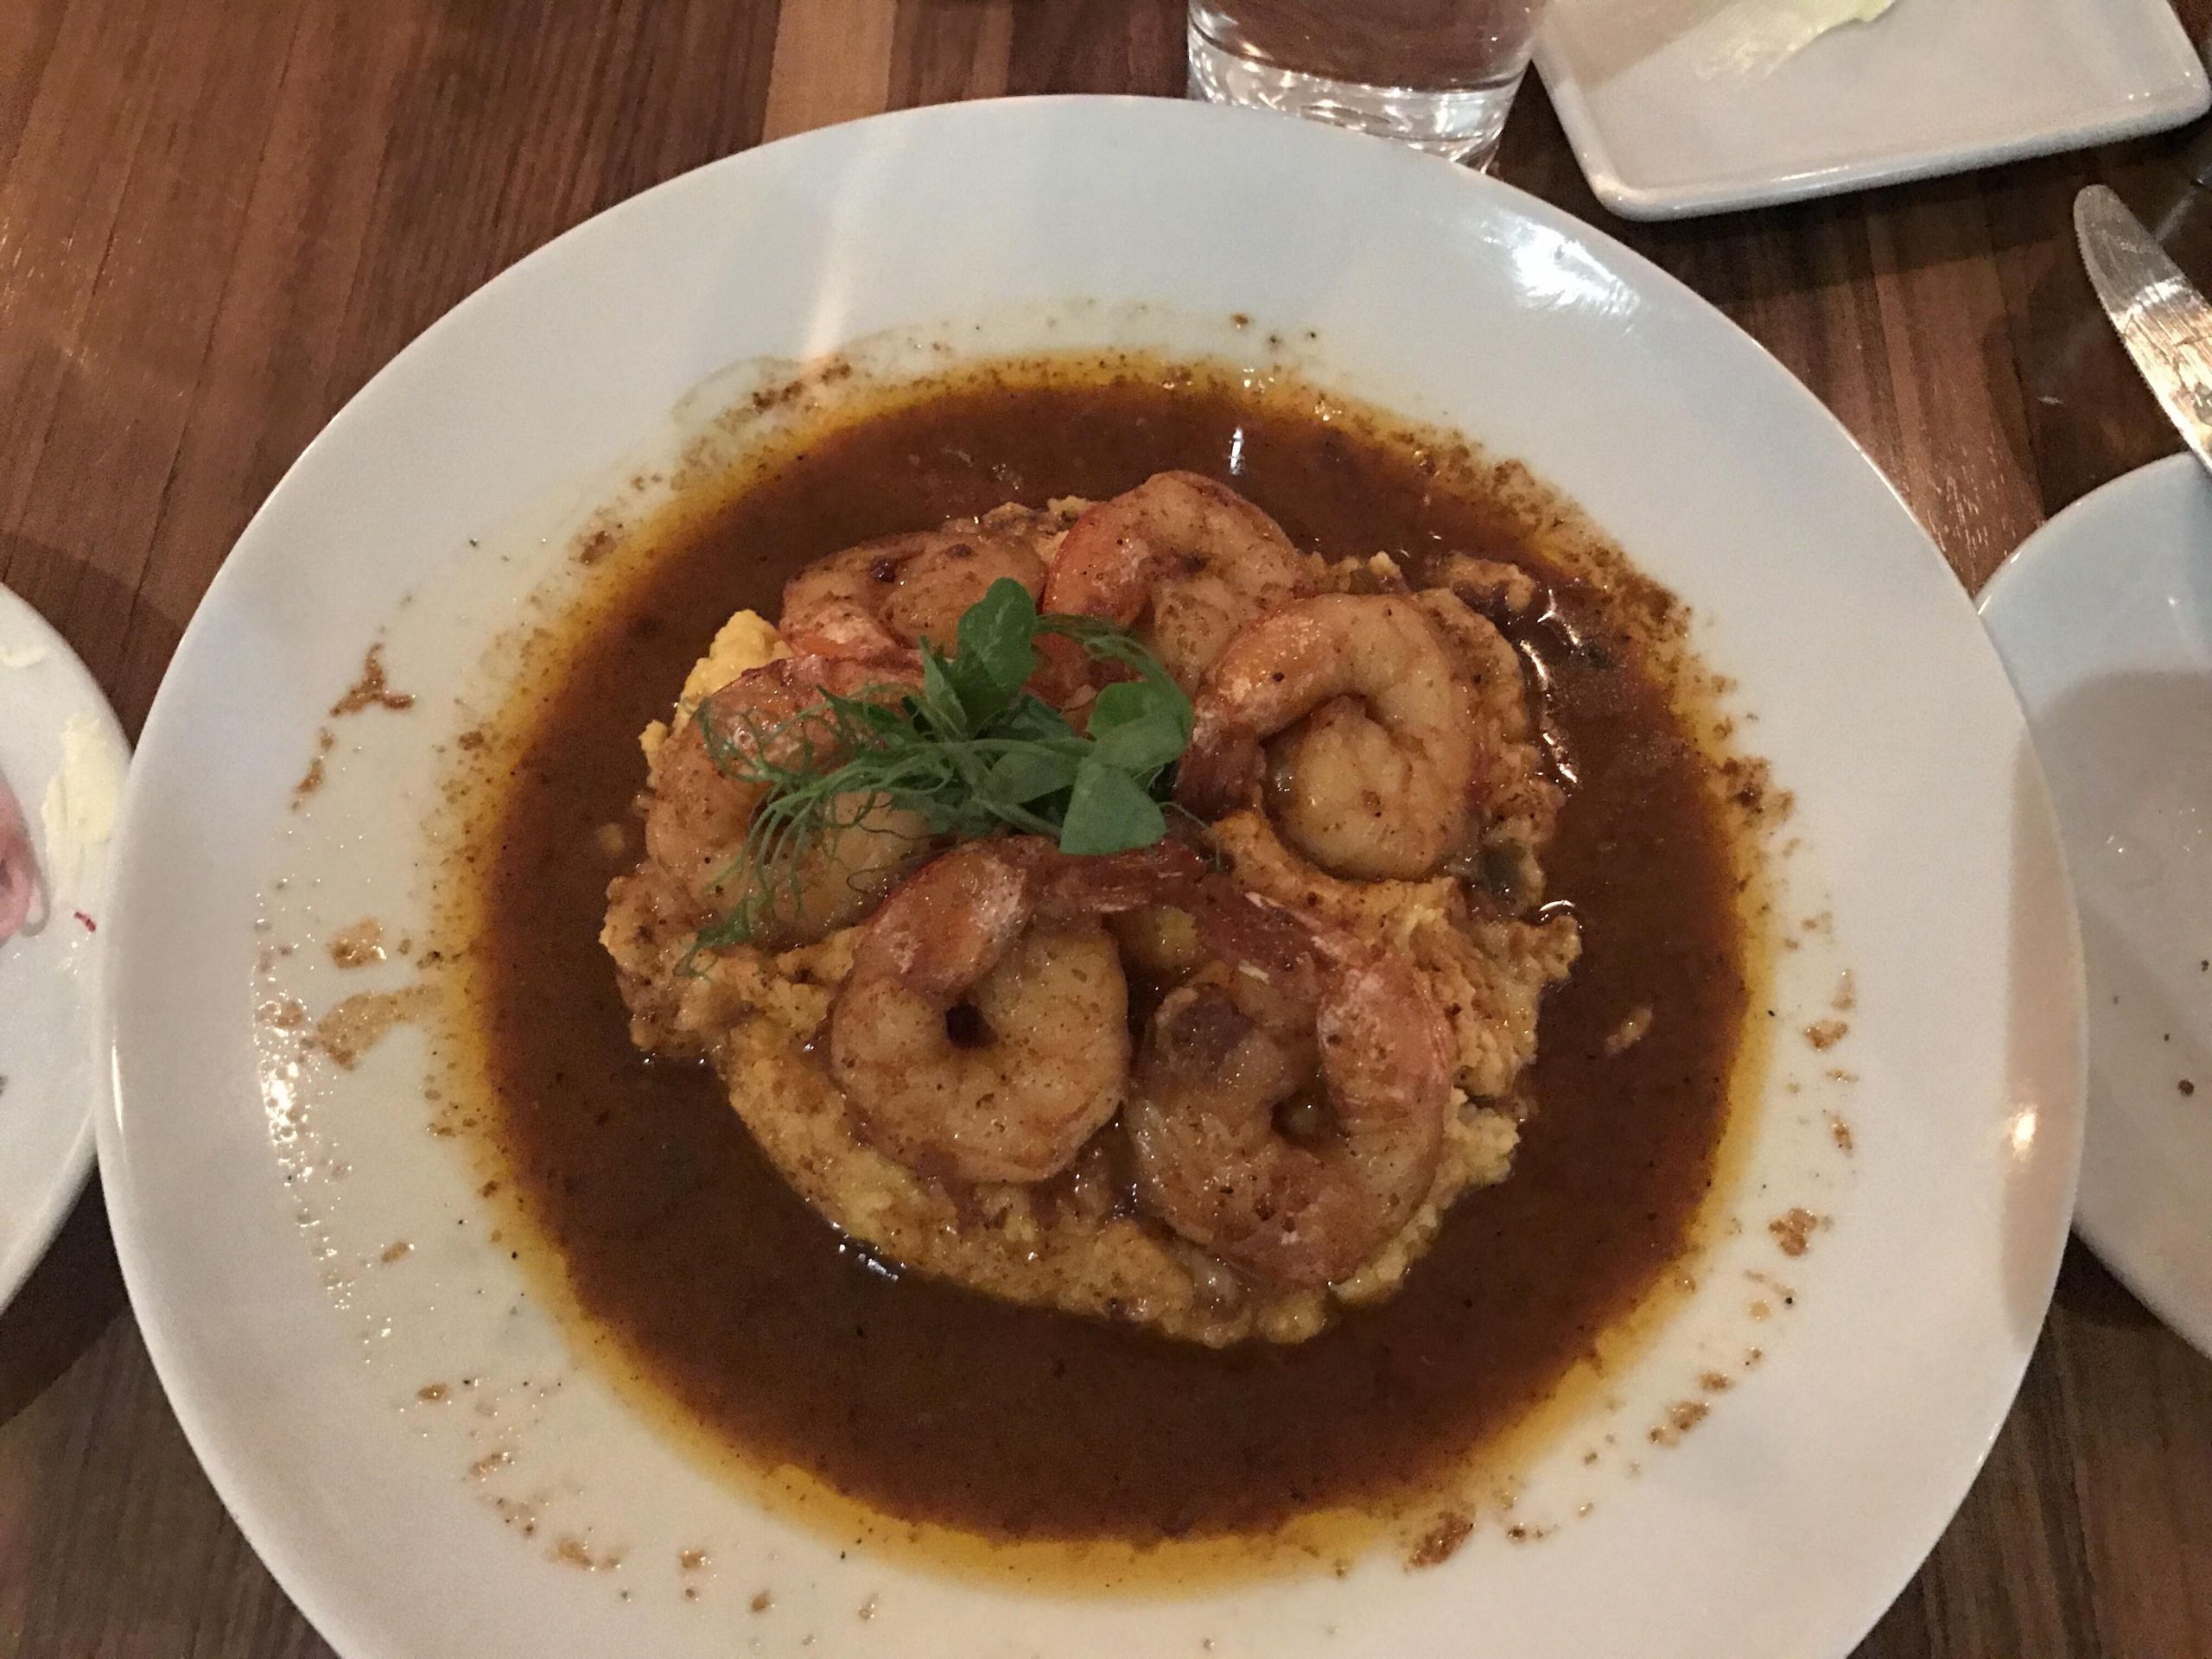 New Orleans Bbq Shrimp And Grits
 [I ate] New Orleans BBQ shrimp and grits food